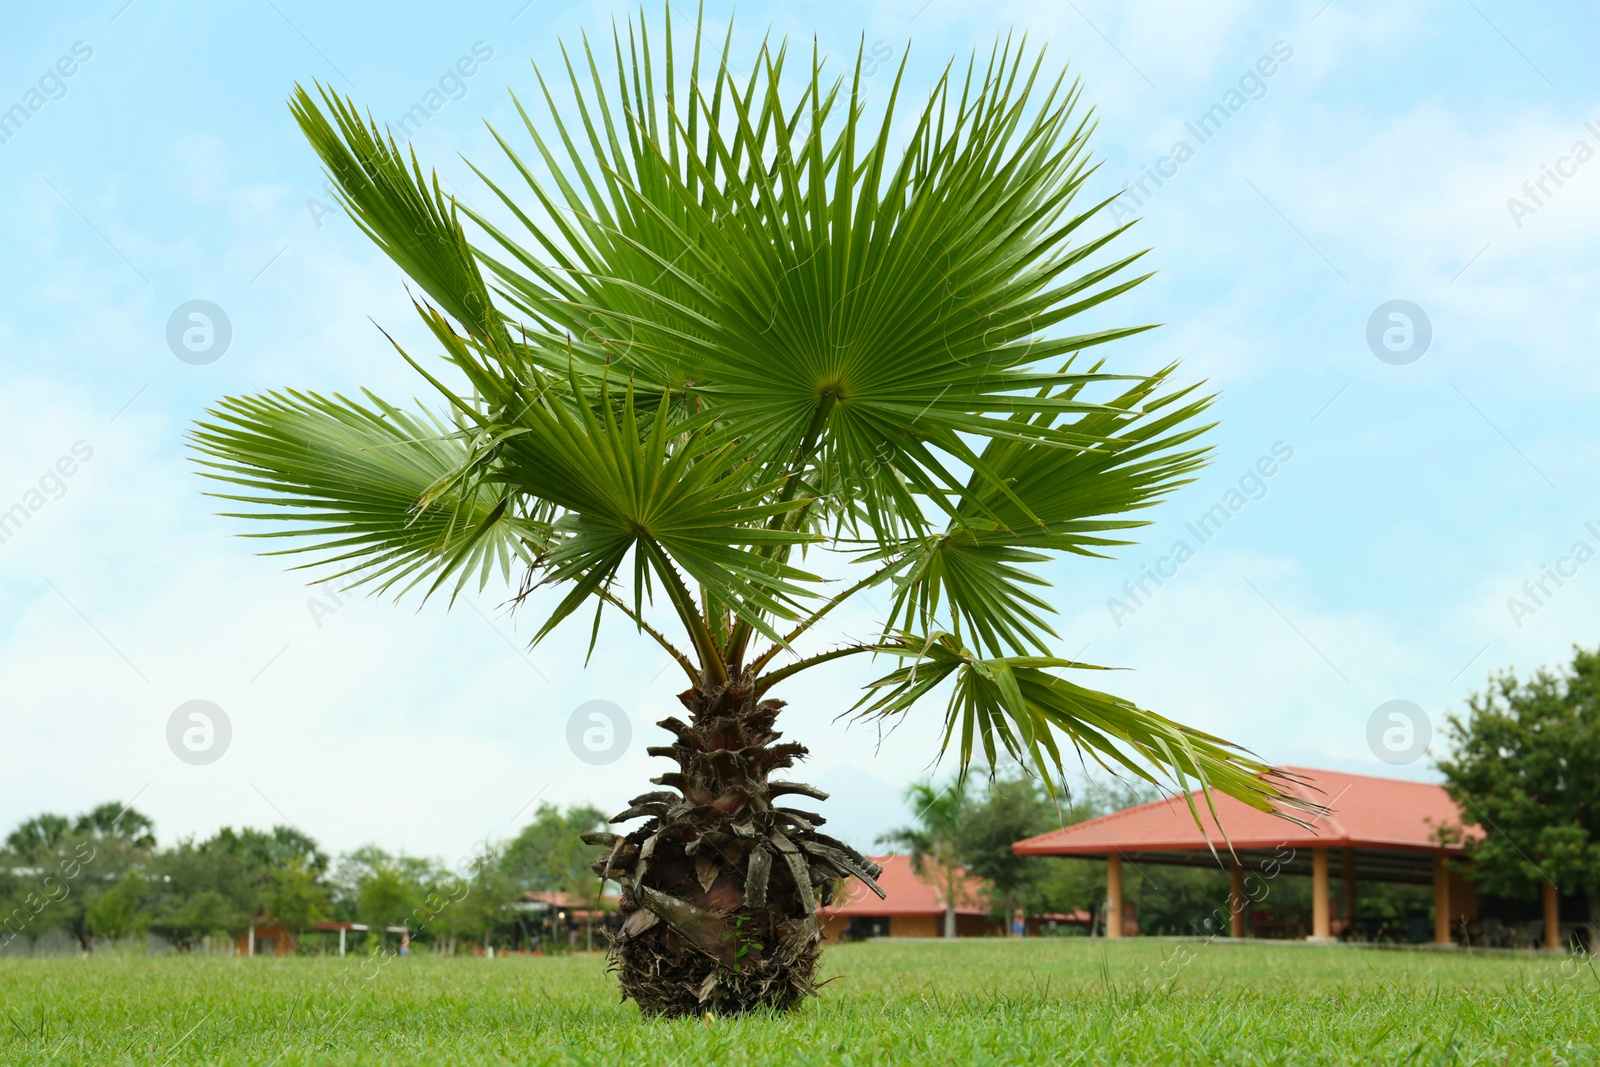 Photo of Tropical palm tree with beautiful green leaves outdoors